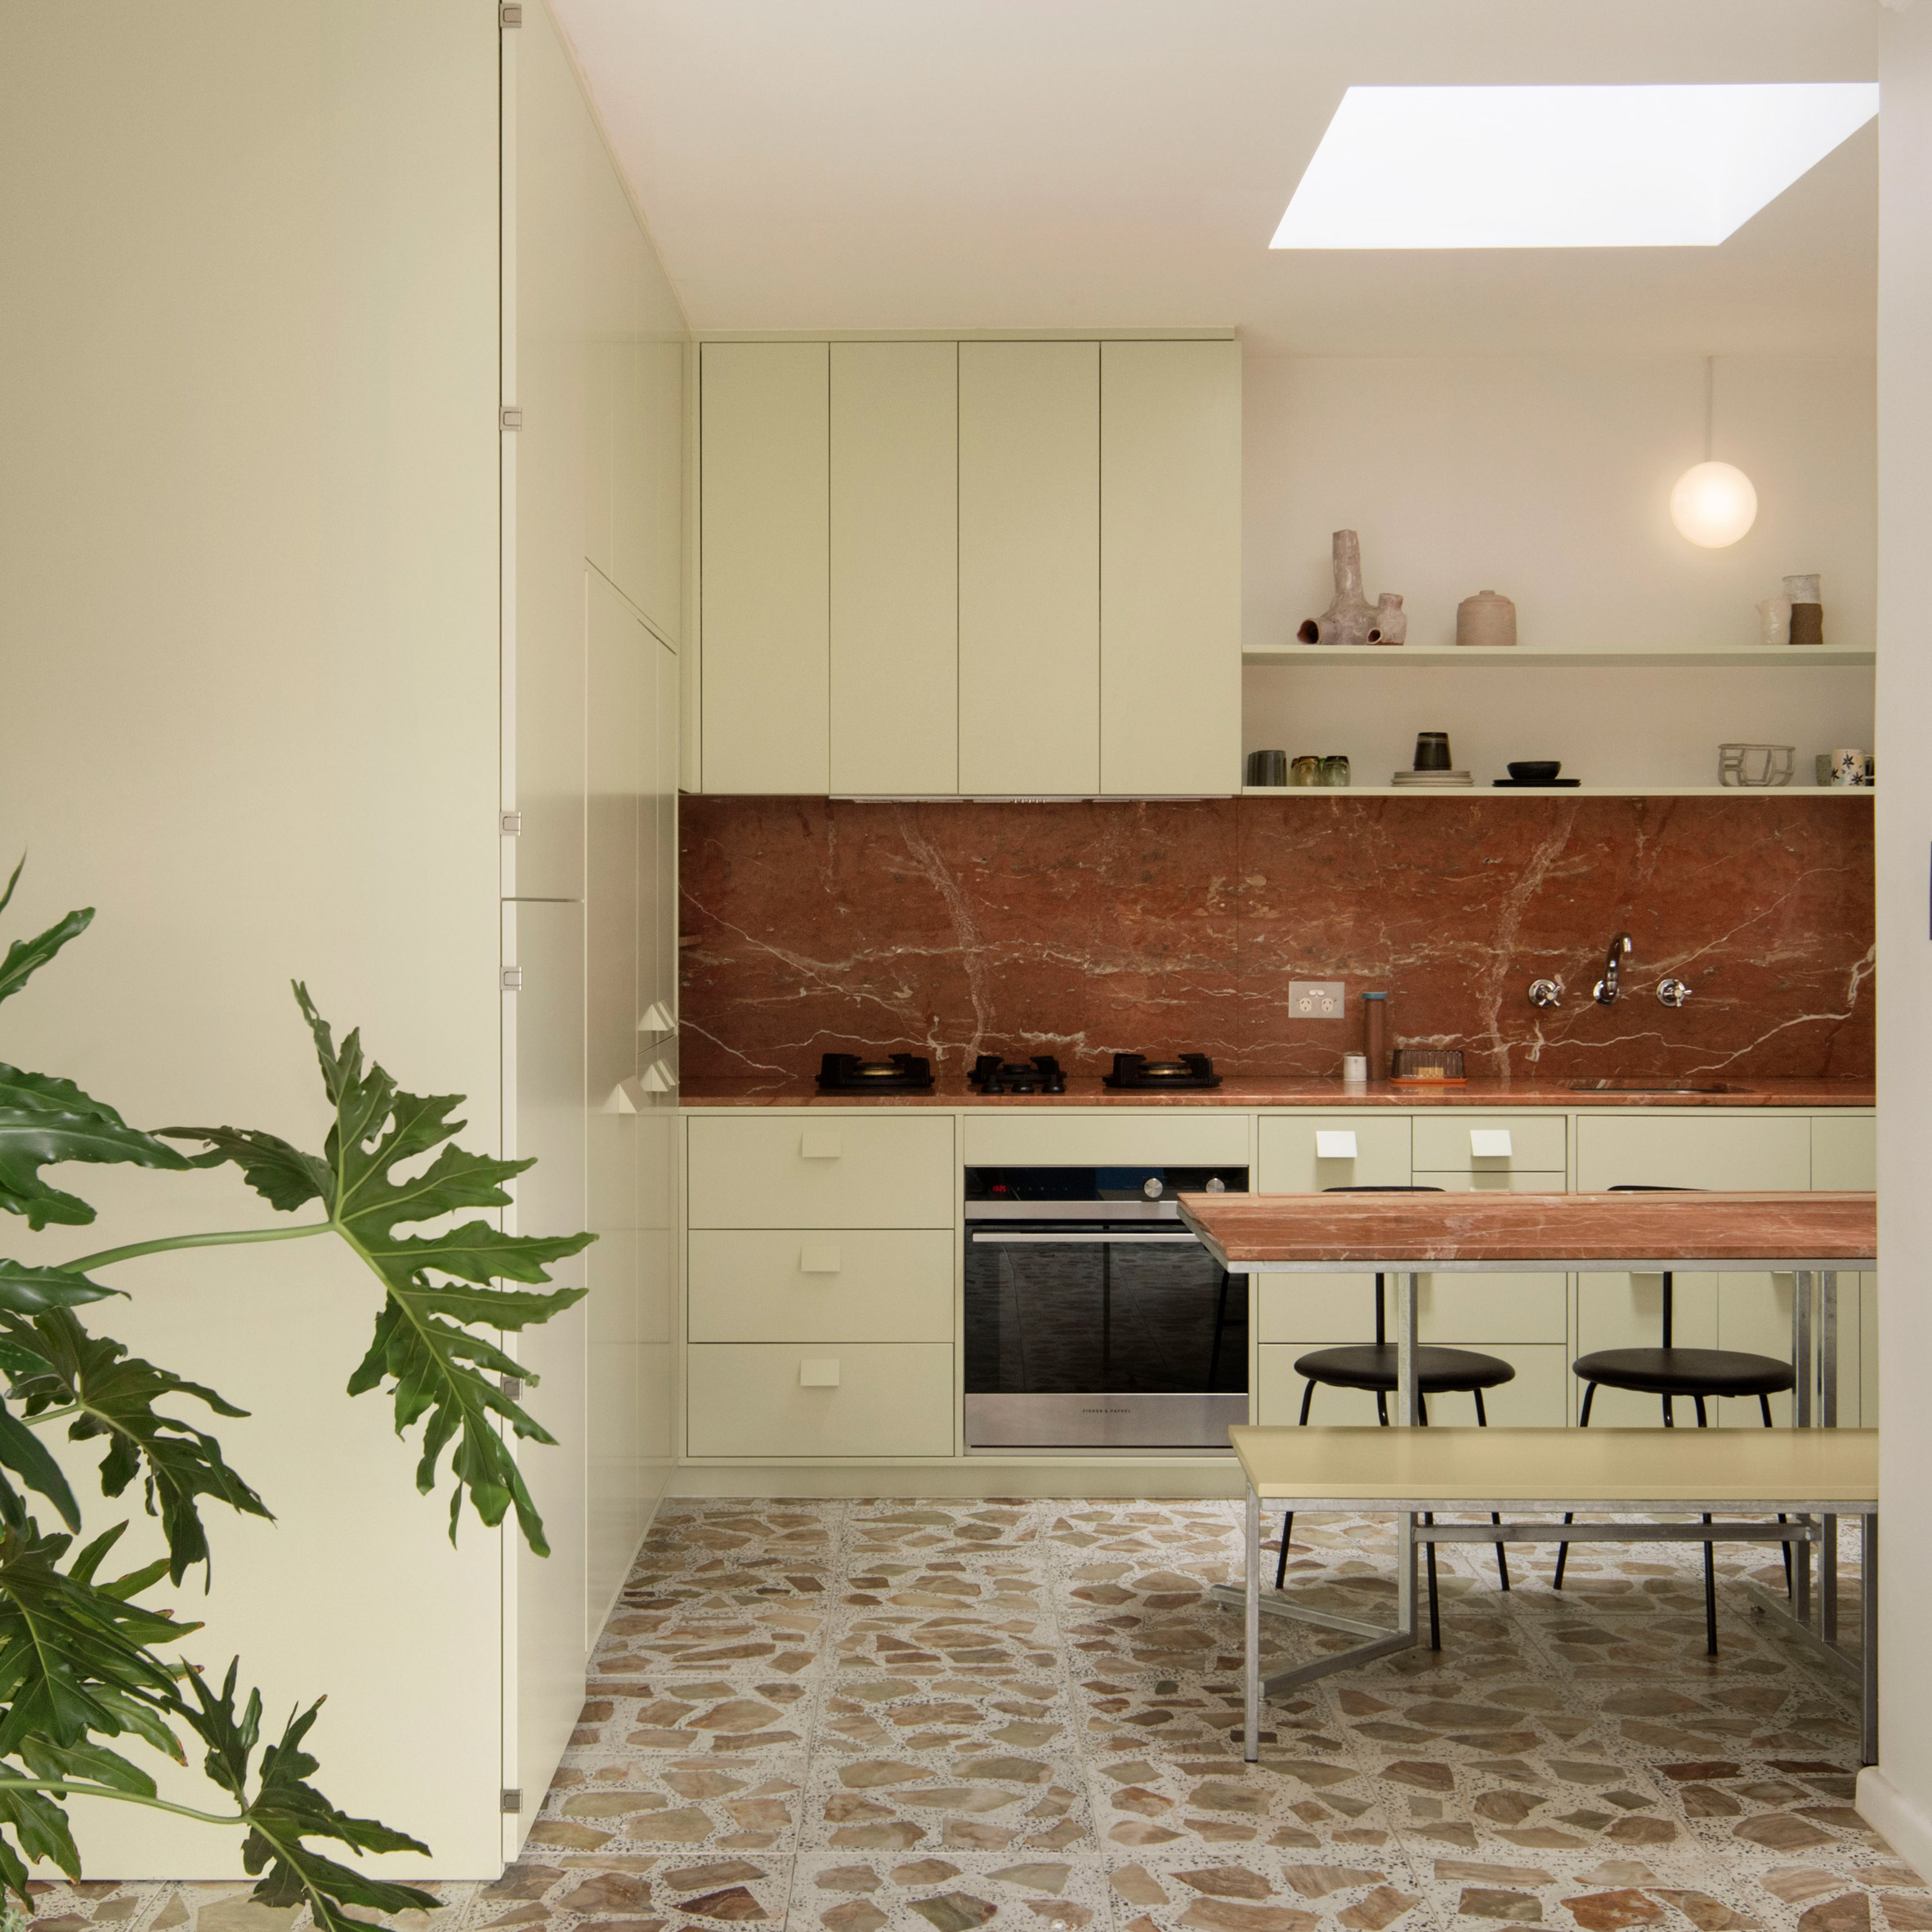 Pistachio green kitchen and terrazzo tiles in Brunswick apartment by Murray Barker and Esther Stewart